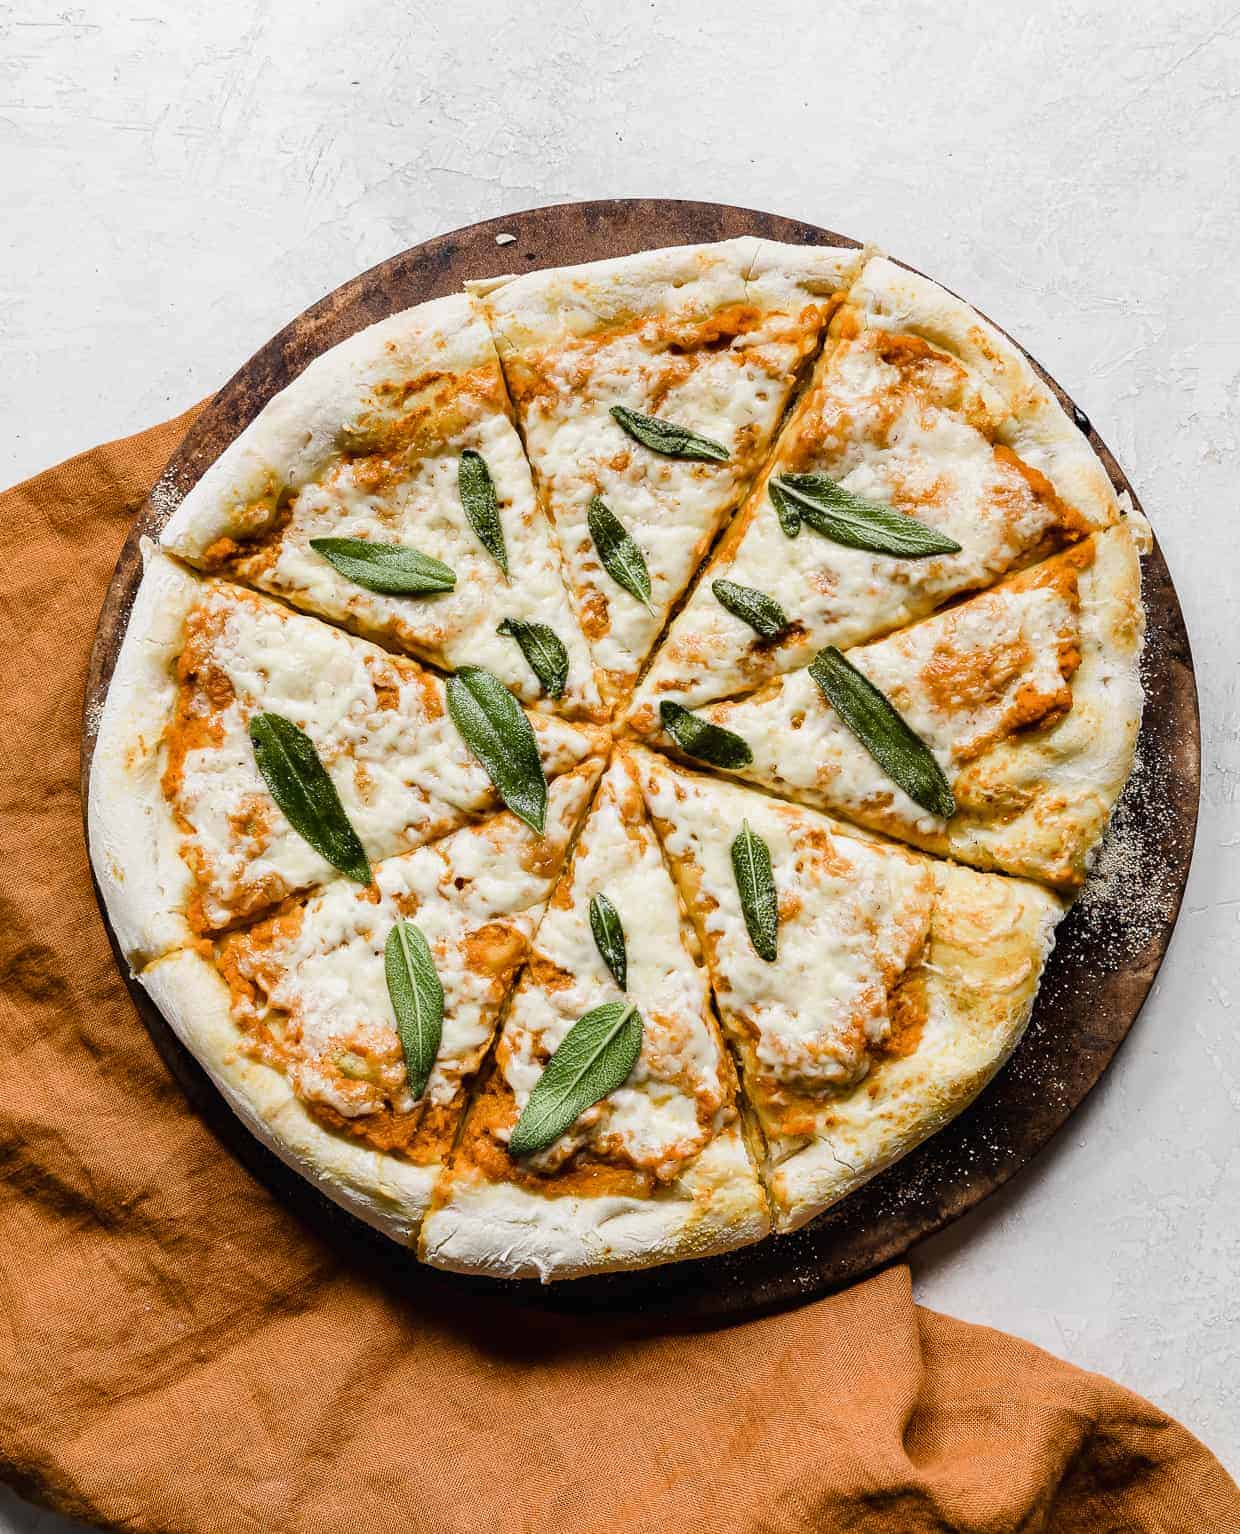 A baked pumpkin pizza topped with sage leaves on a round pizza stone against a gray background.